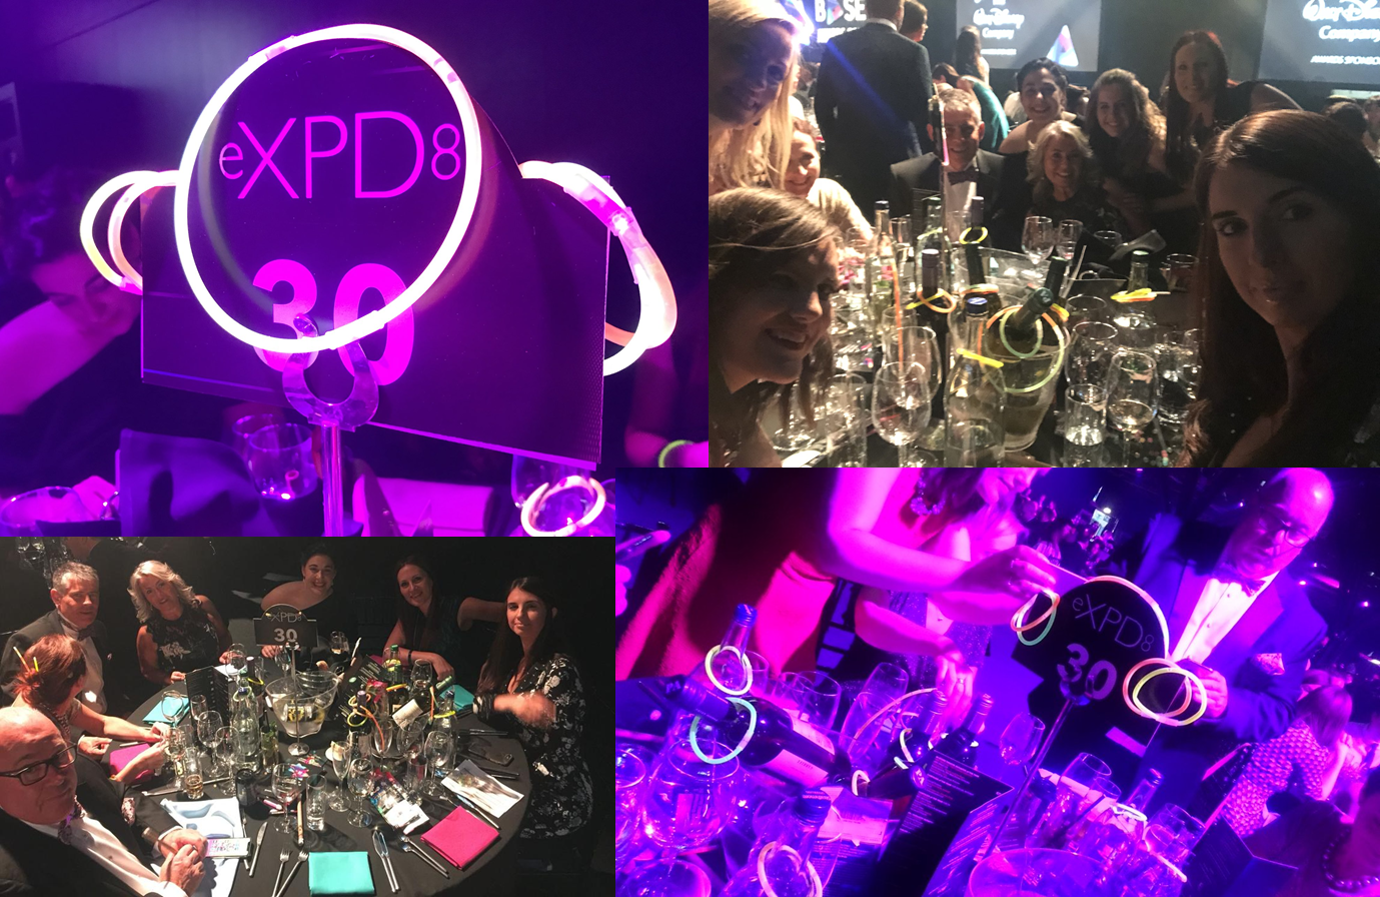 eXPD8 attend BASE Awards 2018